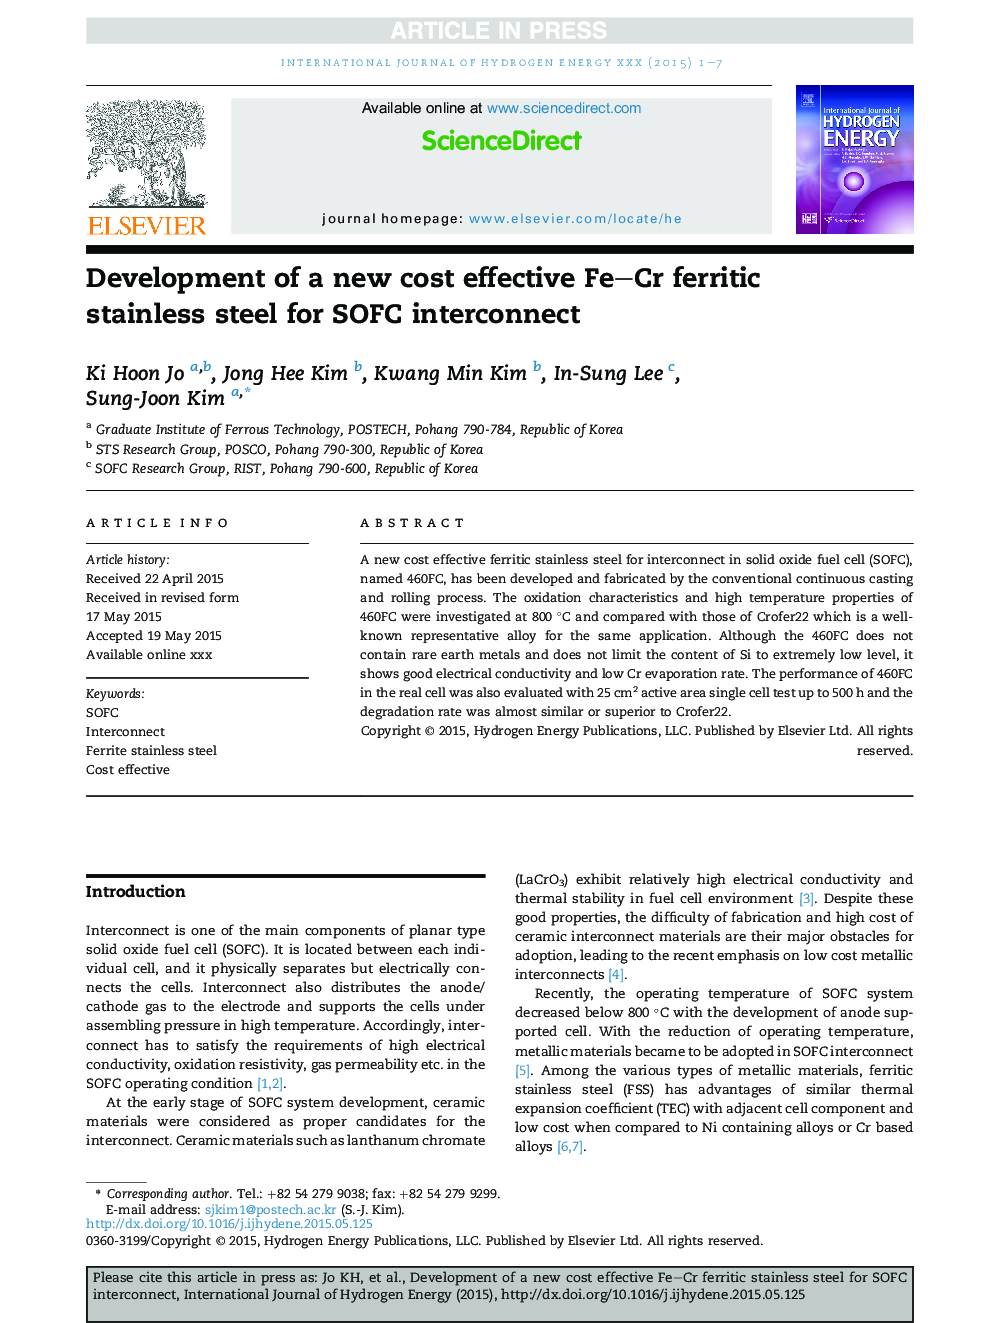 Development of a new cost effective Fe-Cr ferritic stainless steel for SOFC interconnect